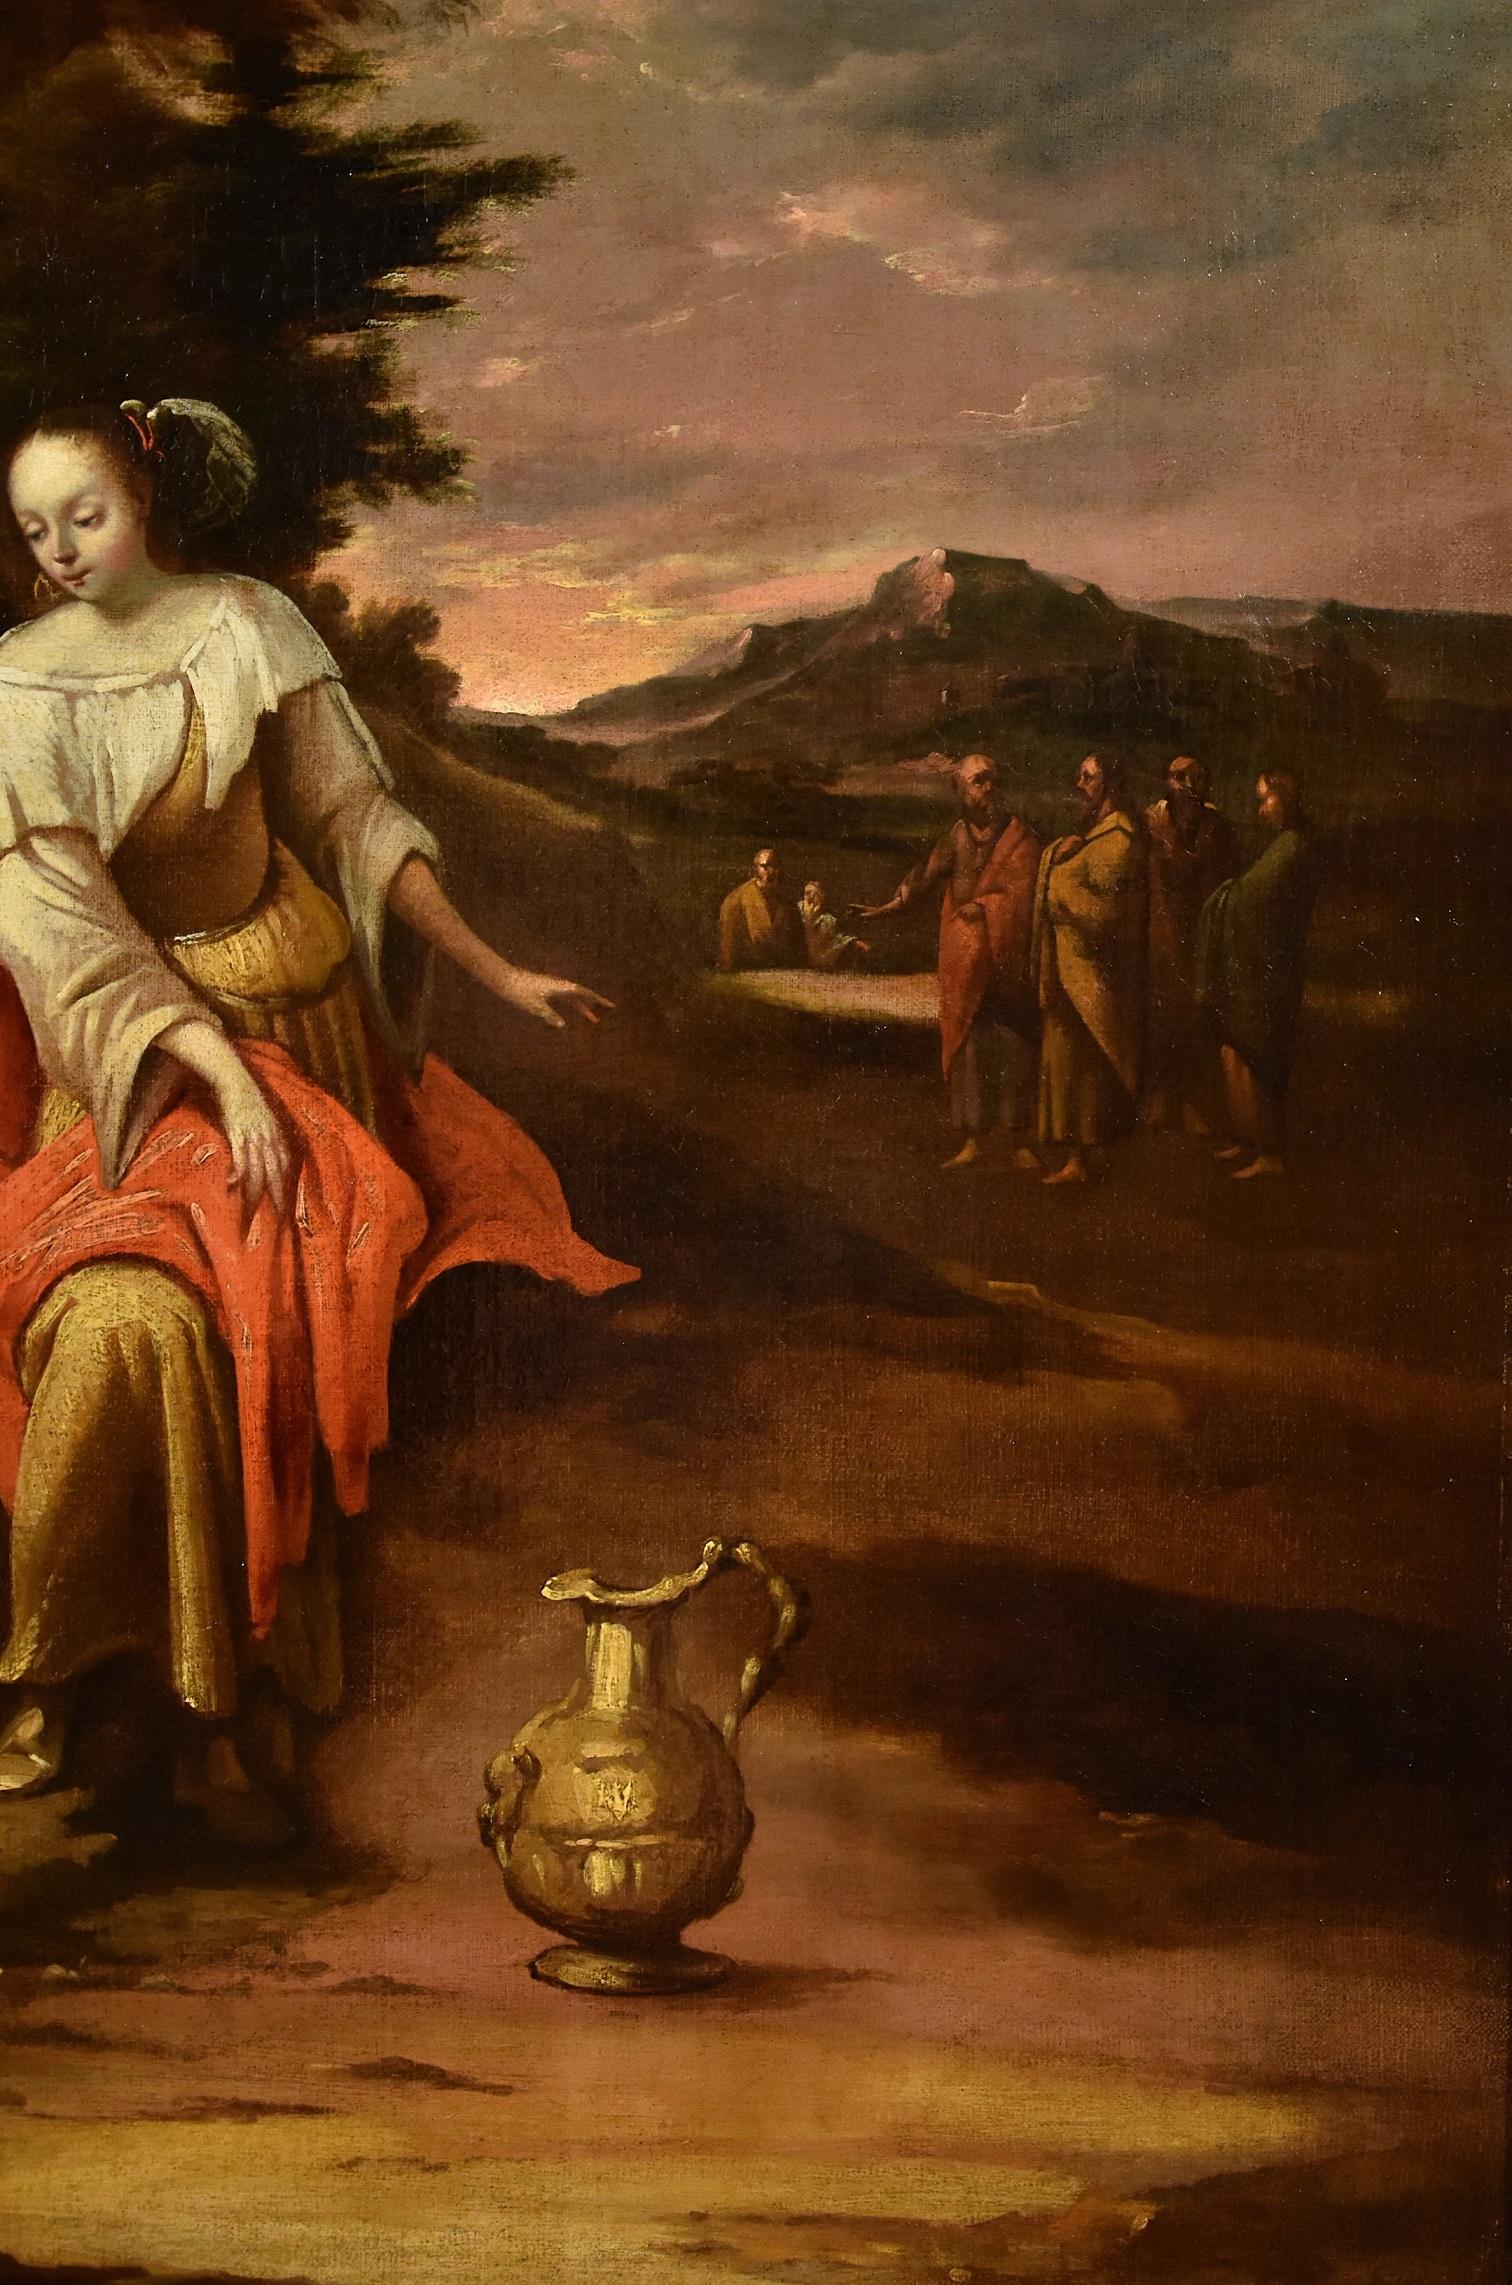 Flemish painter of the 17th century
Christ and the Samaritan woman at the well

Oil painting on canvas
cm. 76 x 104 - In frame cm. 93 x 121

The work is ascribed to a Flemish painter, active in the seventeenth century, and illustrates the episode,